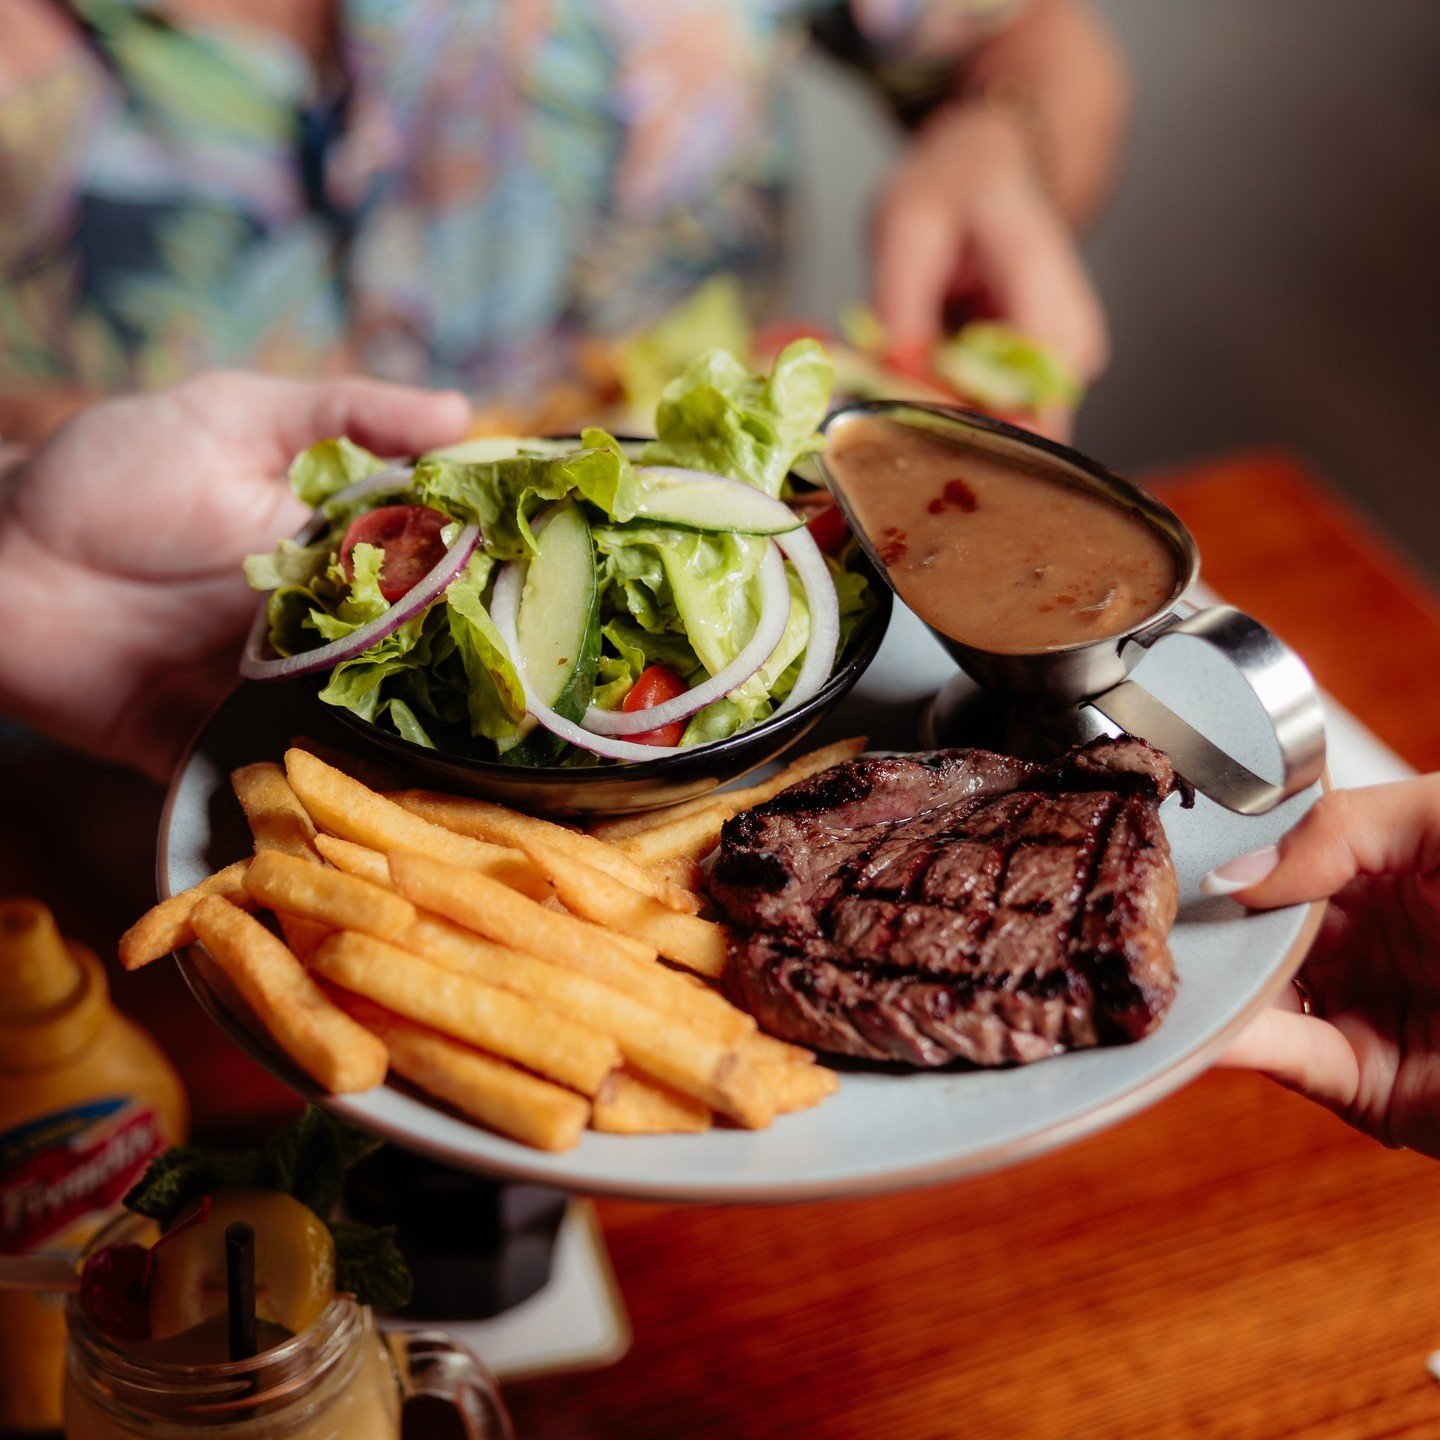 Meat lovers, unite 🥩 Our juicy STEAK &amp; SIP offer is here every Monday for a limited time! 

Indulge in a mouthwatering 200g Rump Steak cooked just the way you like it, paired perfectly with fries, salad, and your choice of local tap beer, house 